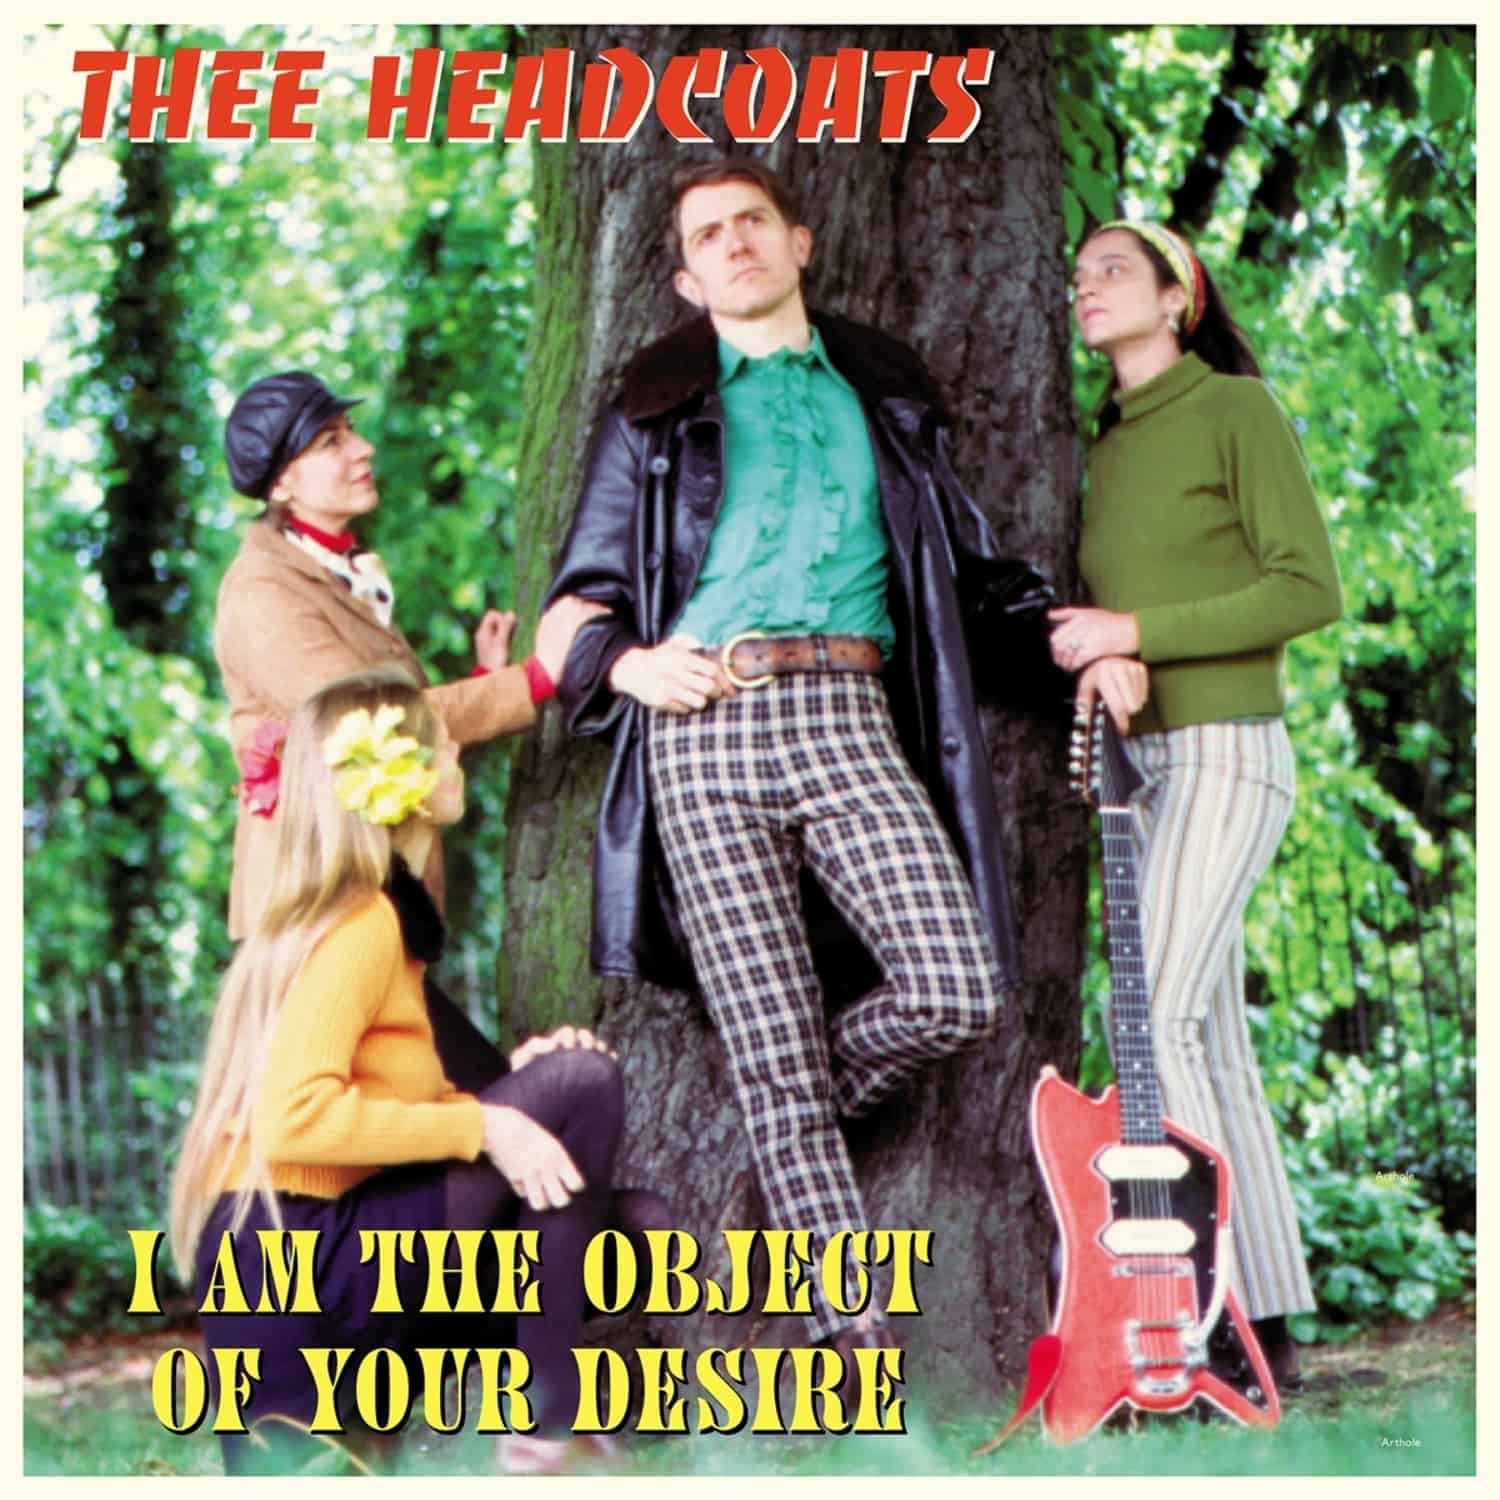 Thee Headcoats - I AM THE OBJECT OF YOUR DESIRE 